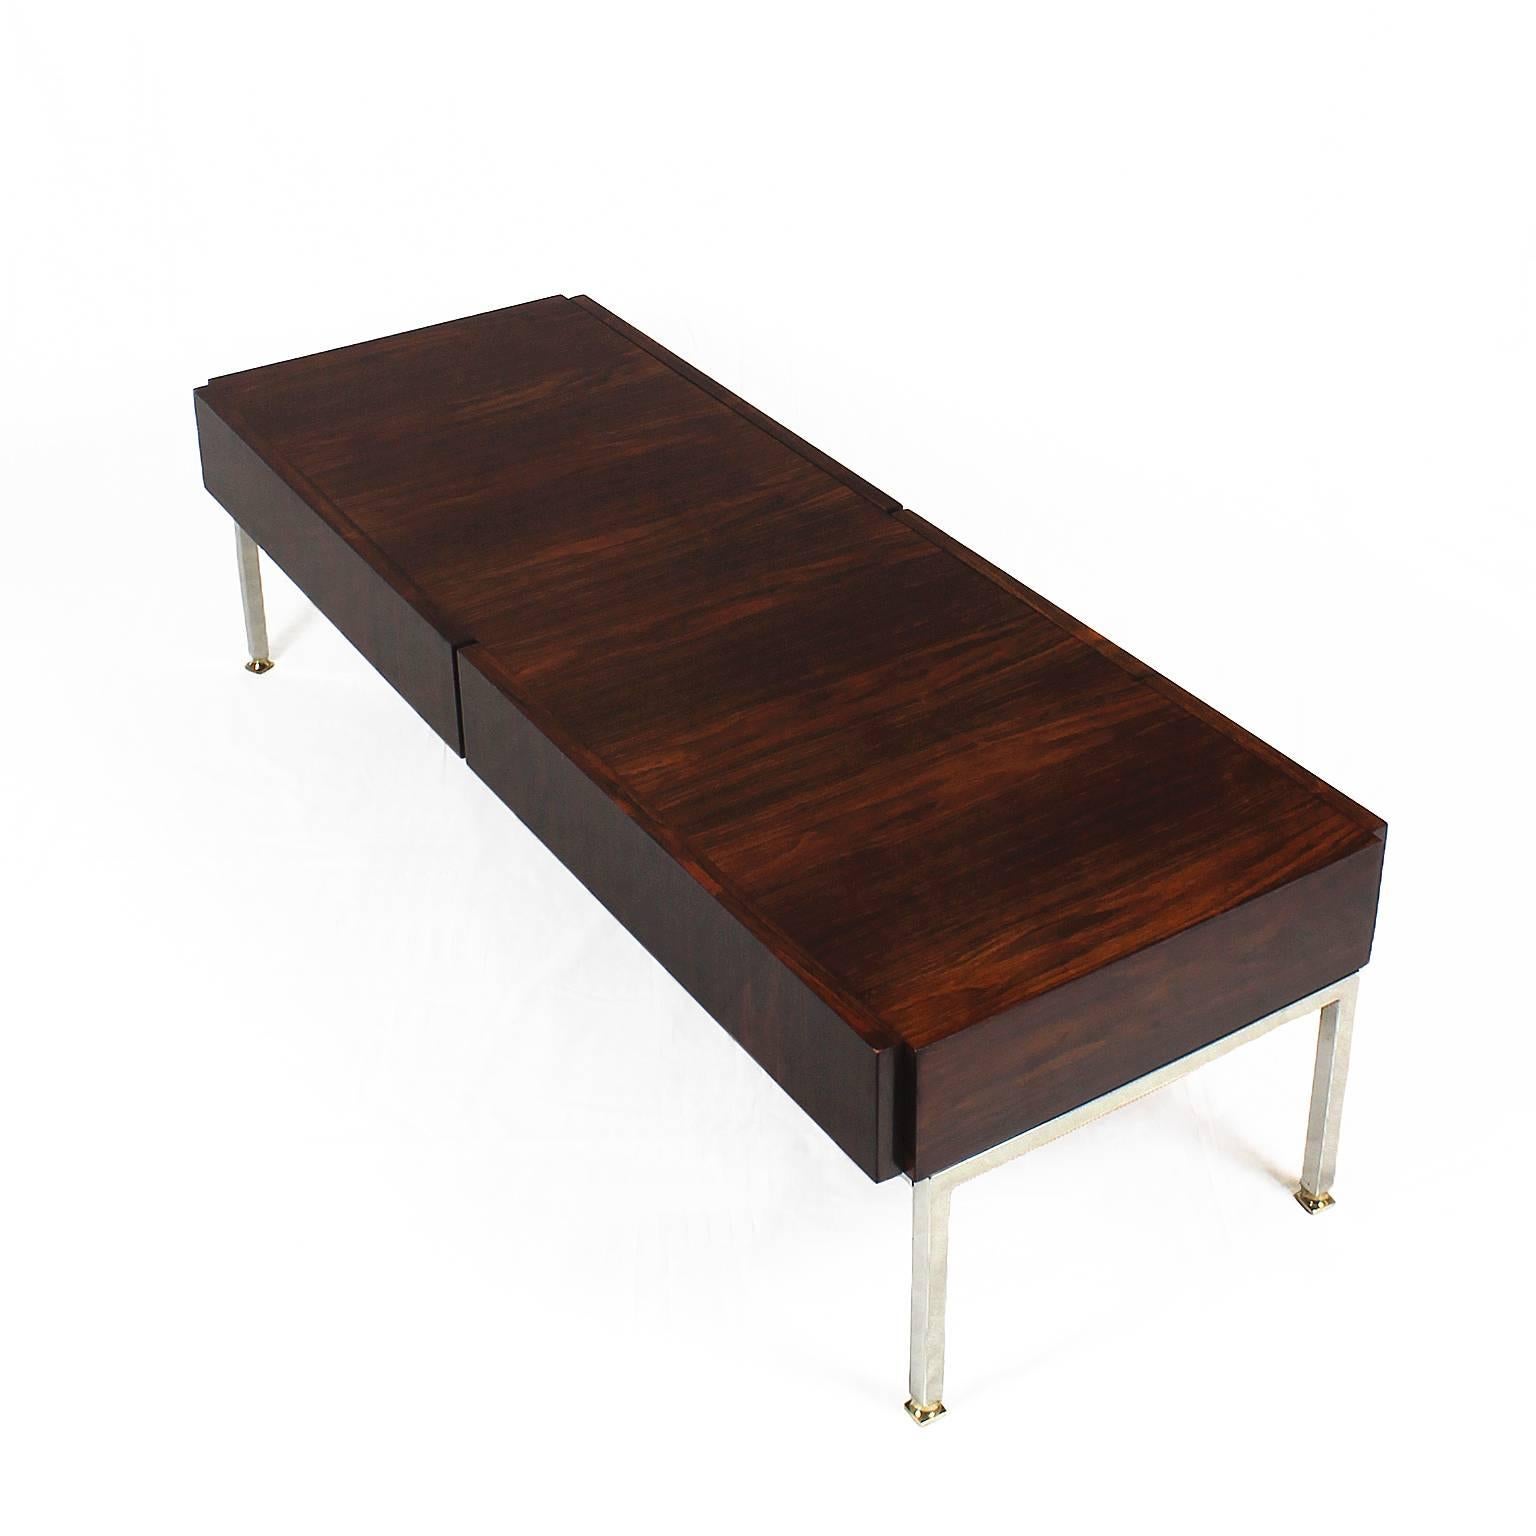 French Mid-Century Modern Coffee Table by Luigi Bartolini, Mahogany, 2 drawers - France For Sale